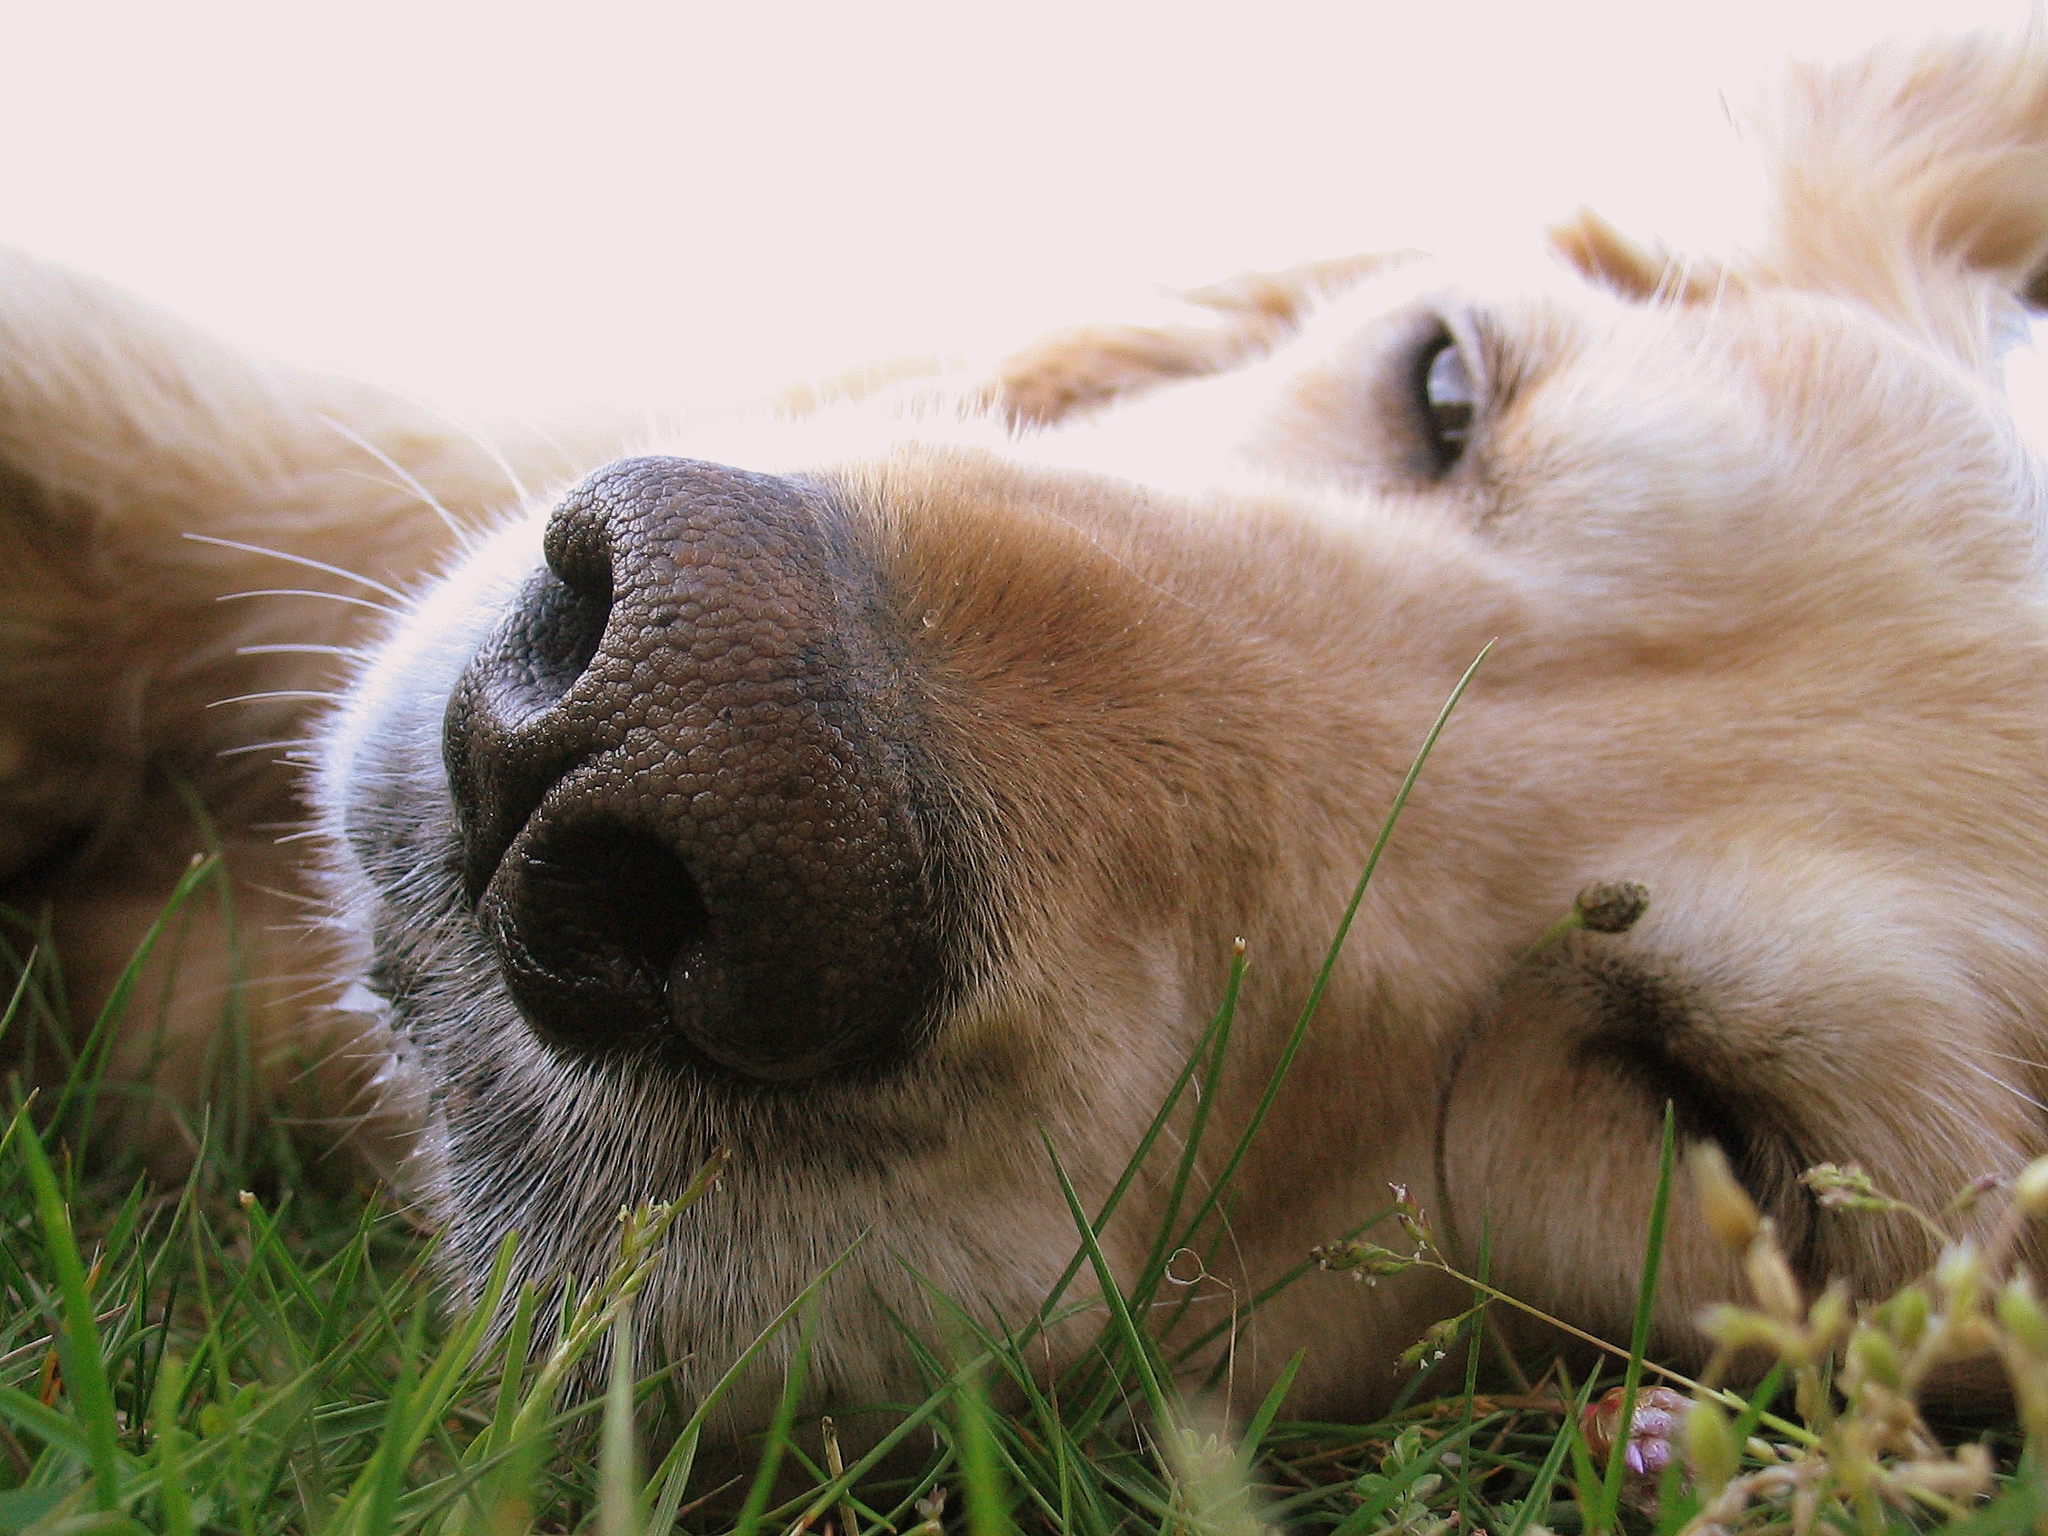 a close up of a dog with its mouth resting in the grass